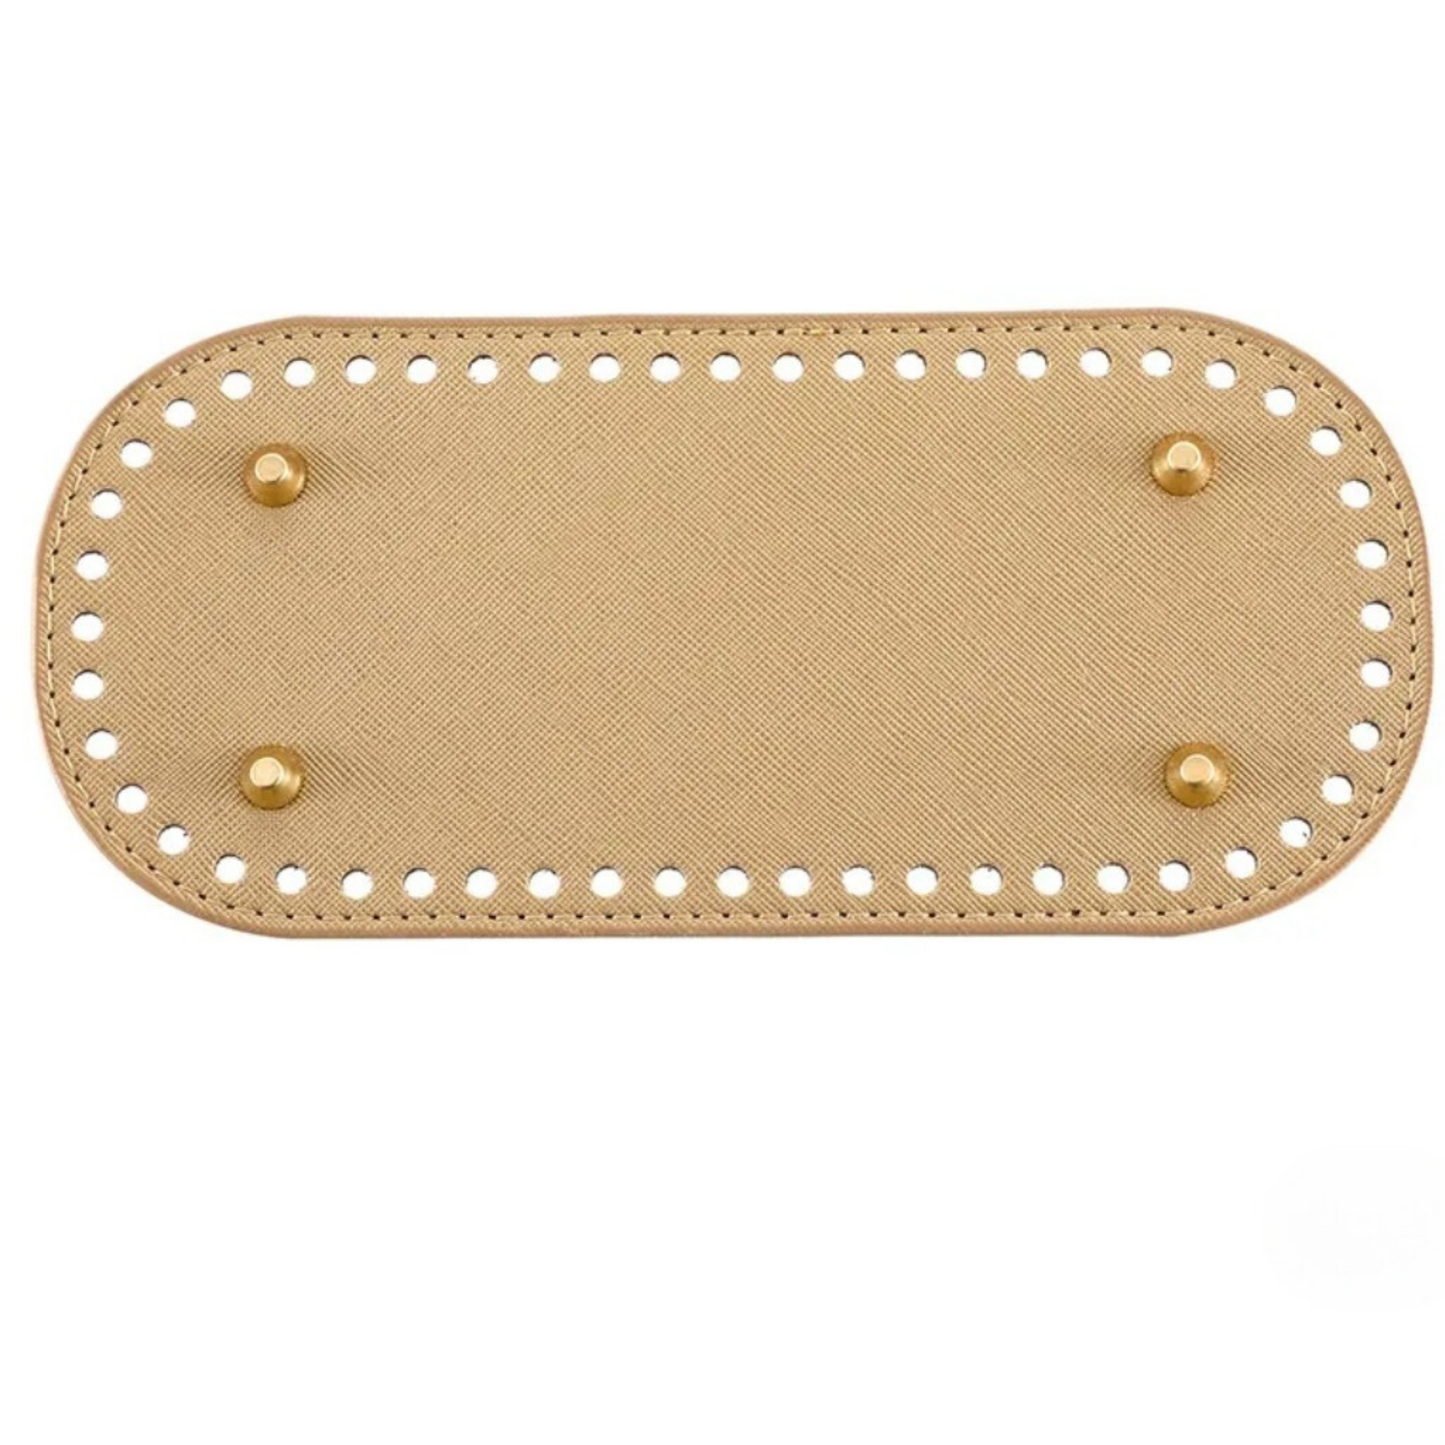 Leather Bottom with holes for Crochet Bag Making